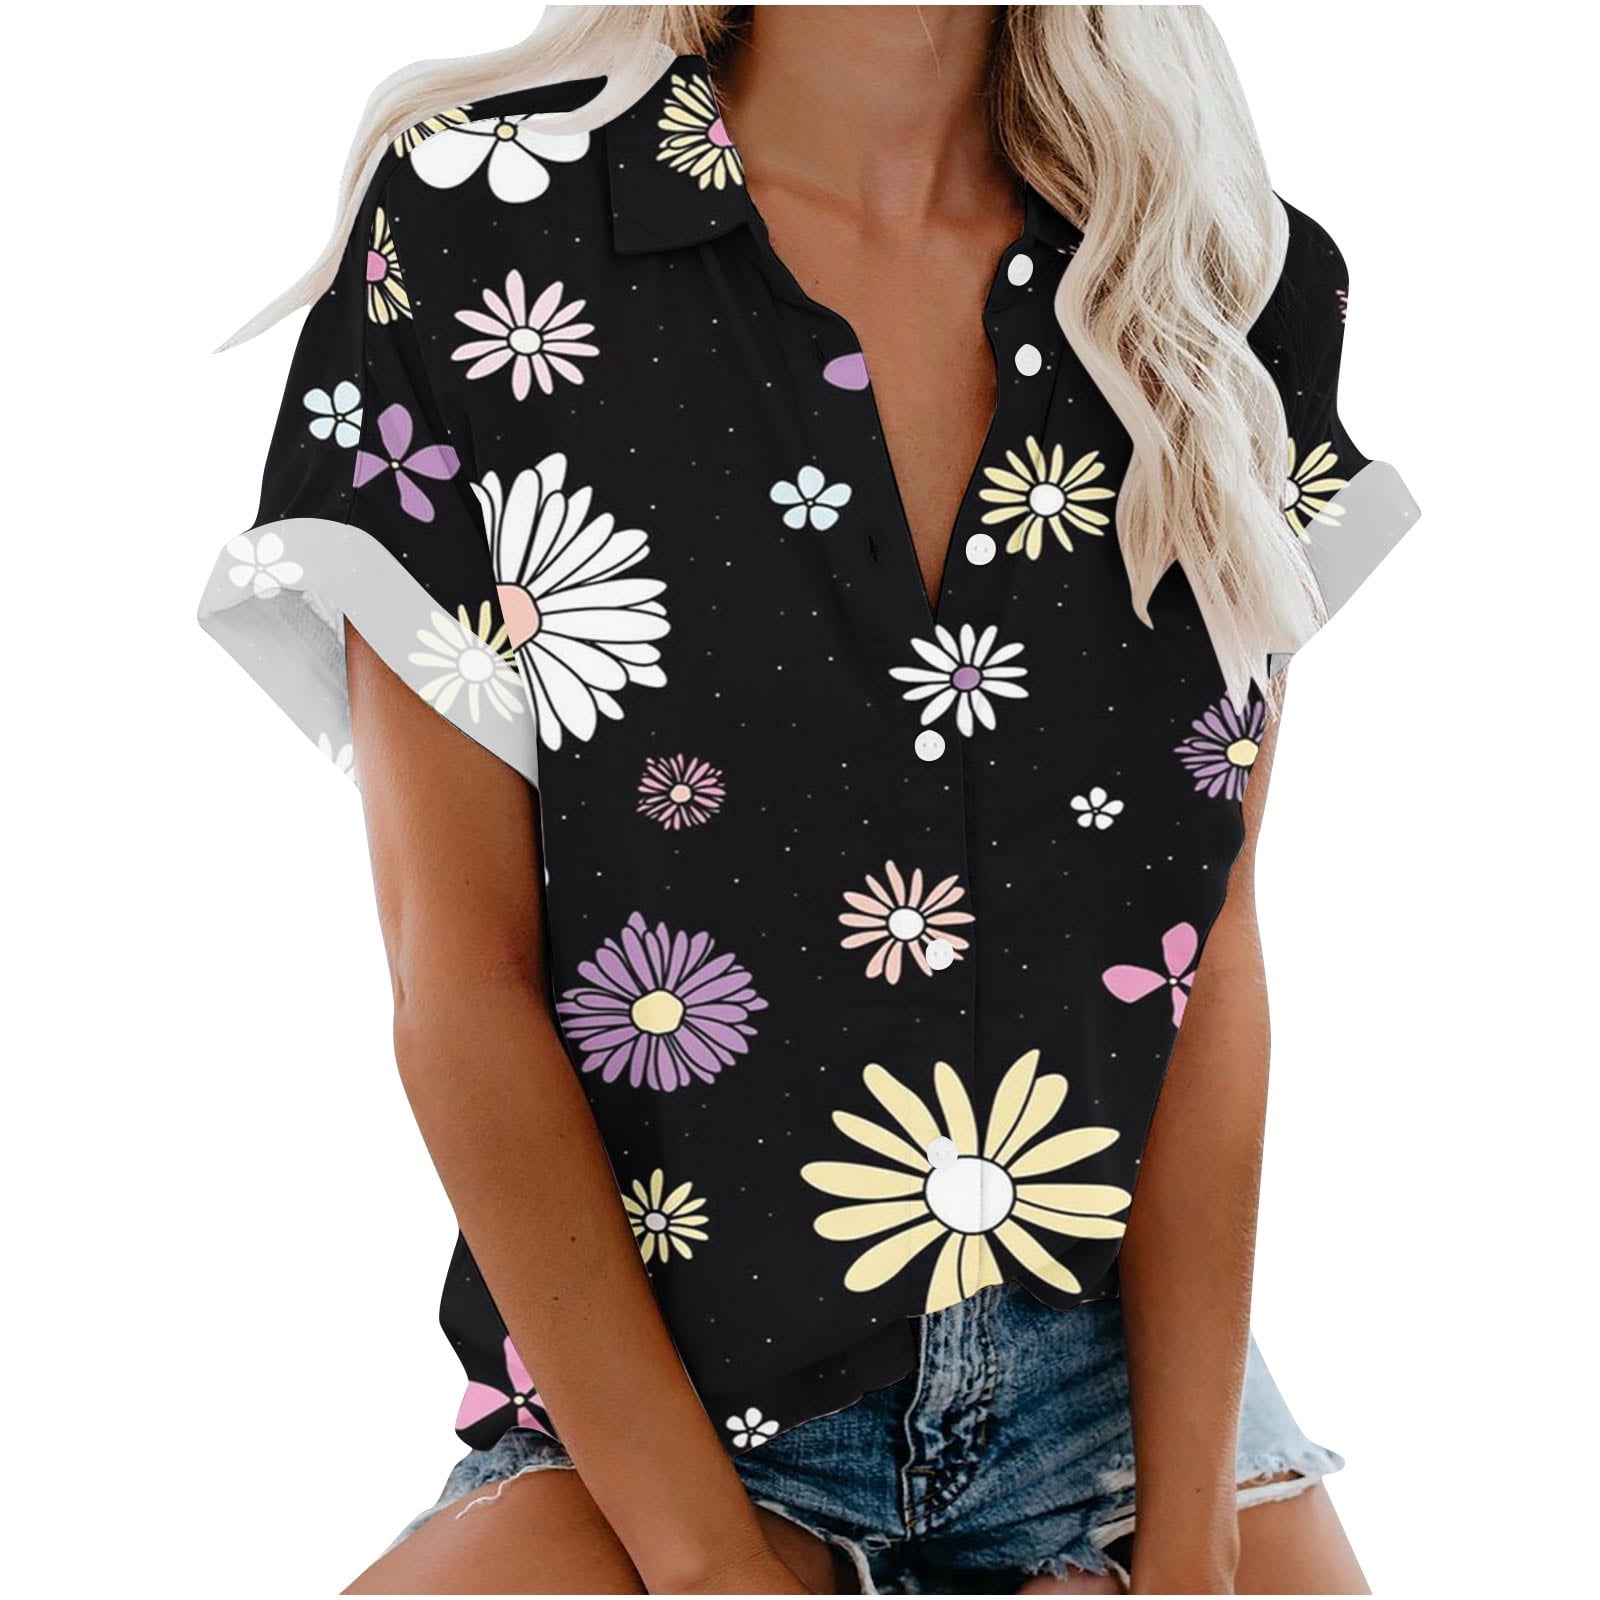  Plus Size Tops for Women Casual Summer Button Up Henley V-Neck  Vintage Pattern Work Tops for Women Party Tops for Women Short Sleeve  Womens Tees Dressy Blouses for Women with Pockets